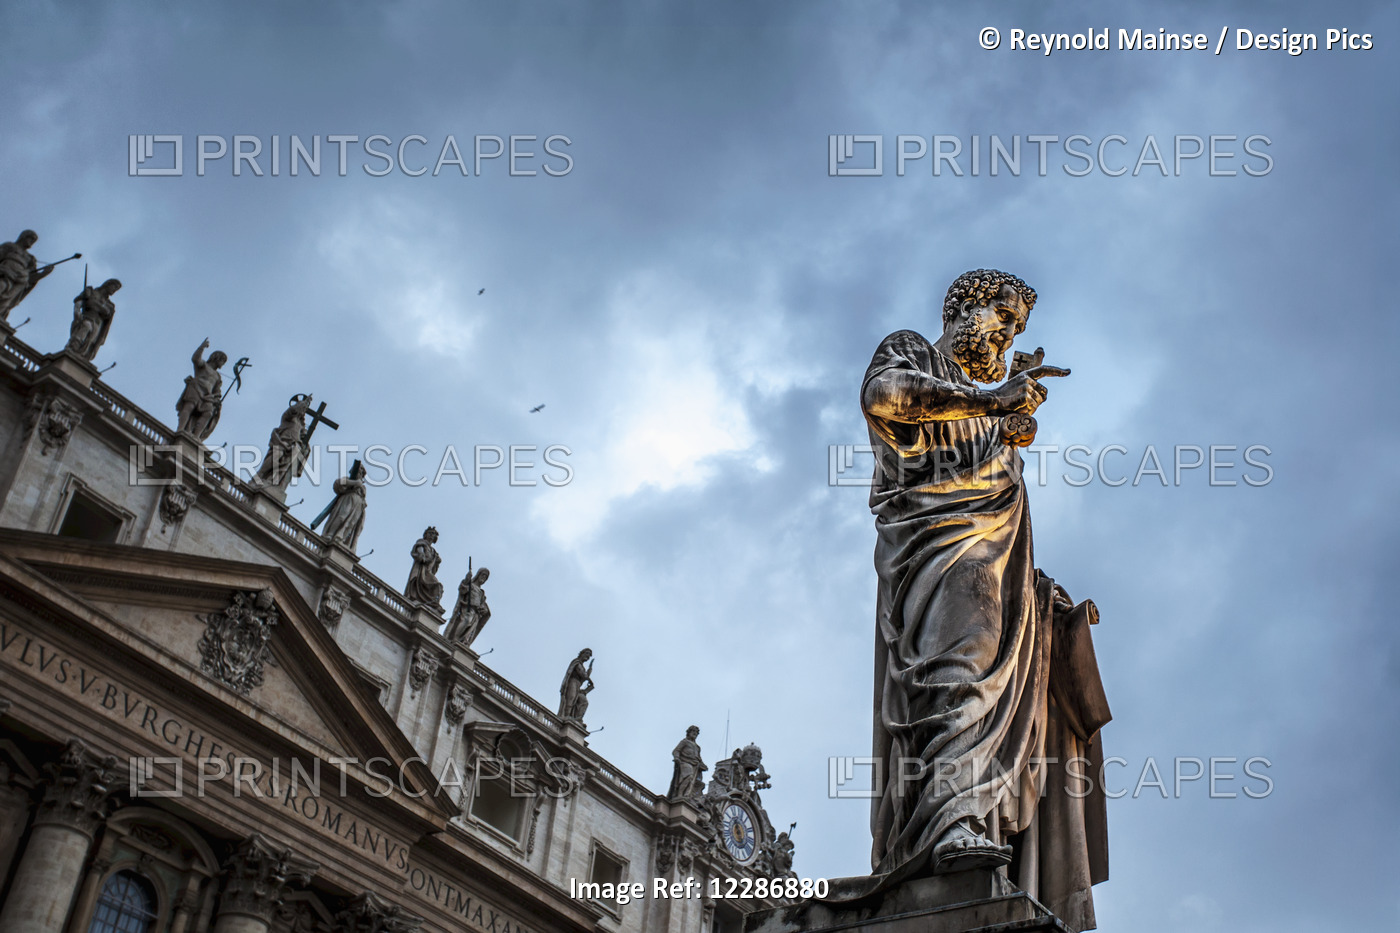 Statue Of Peter At Saint Peter's Basilica; Rome, Italy